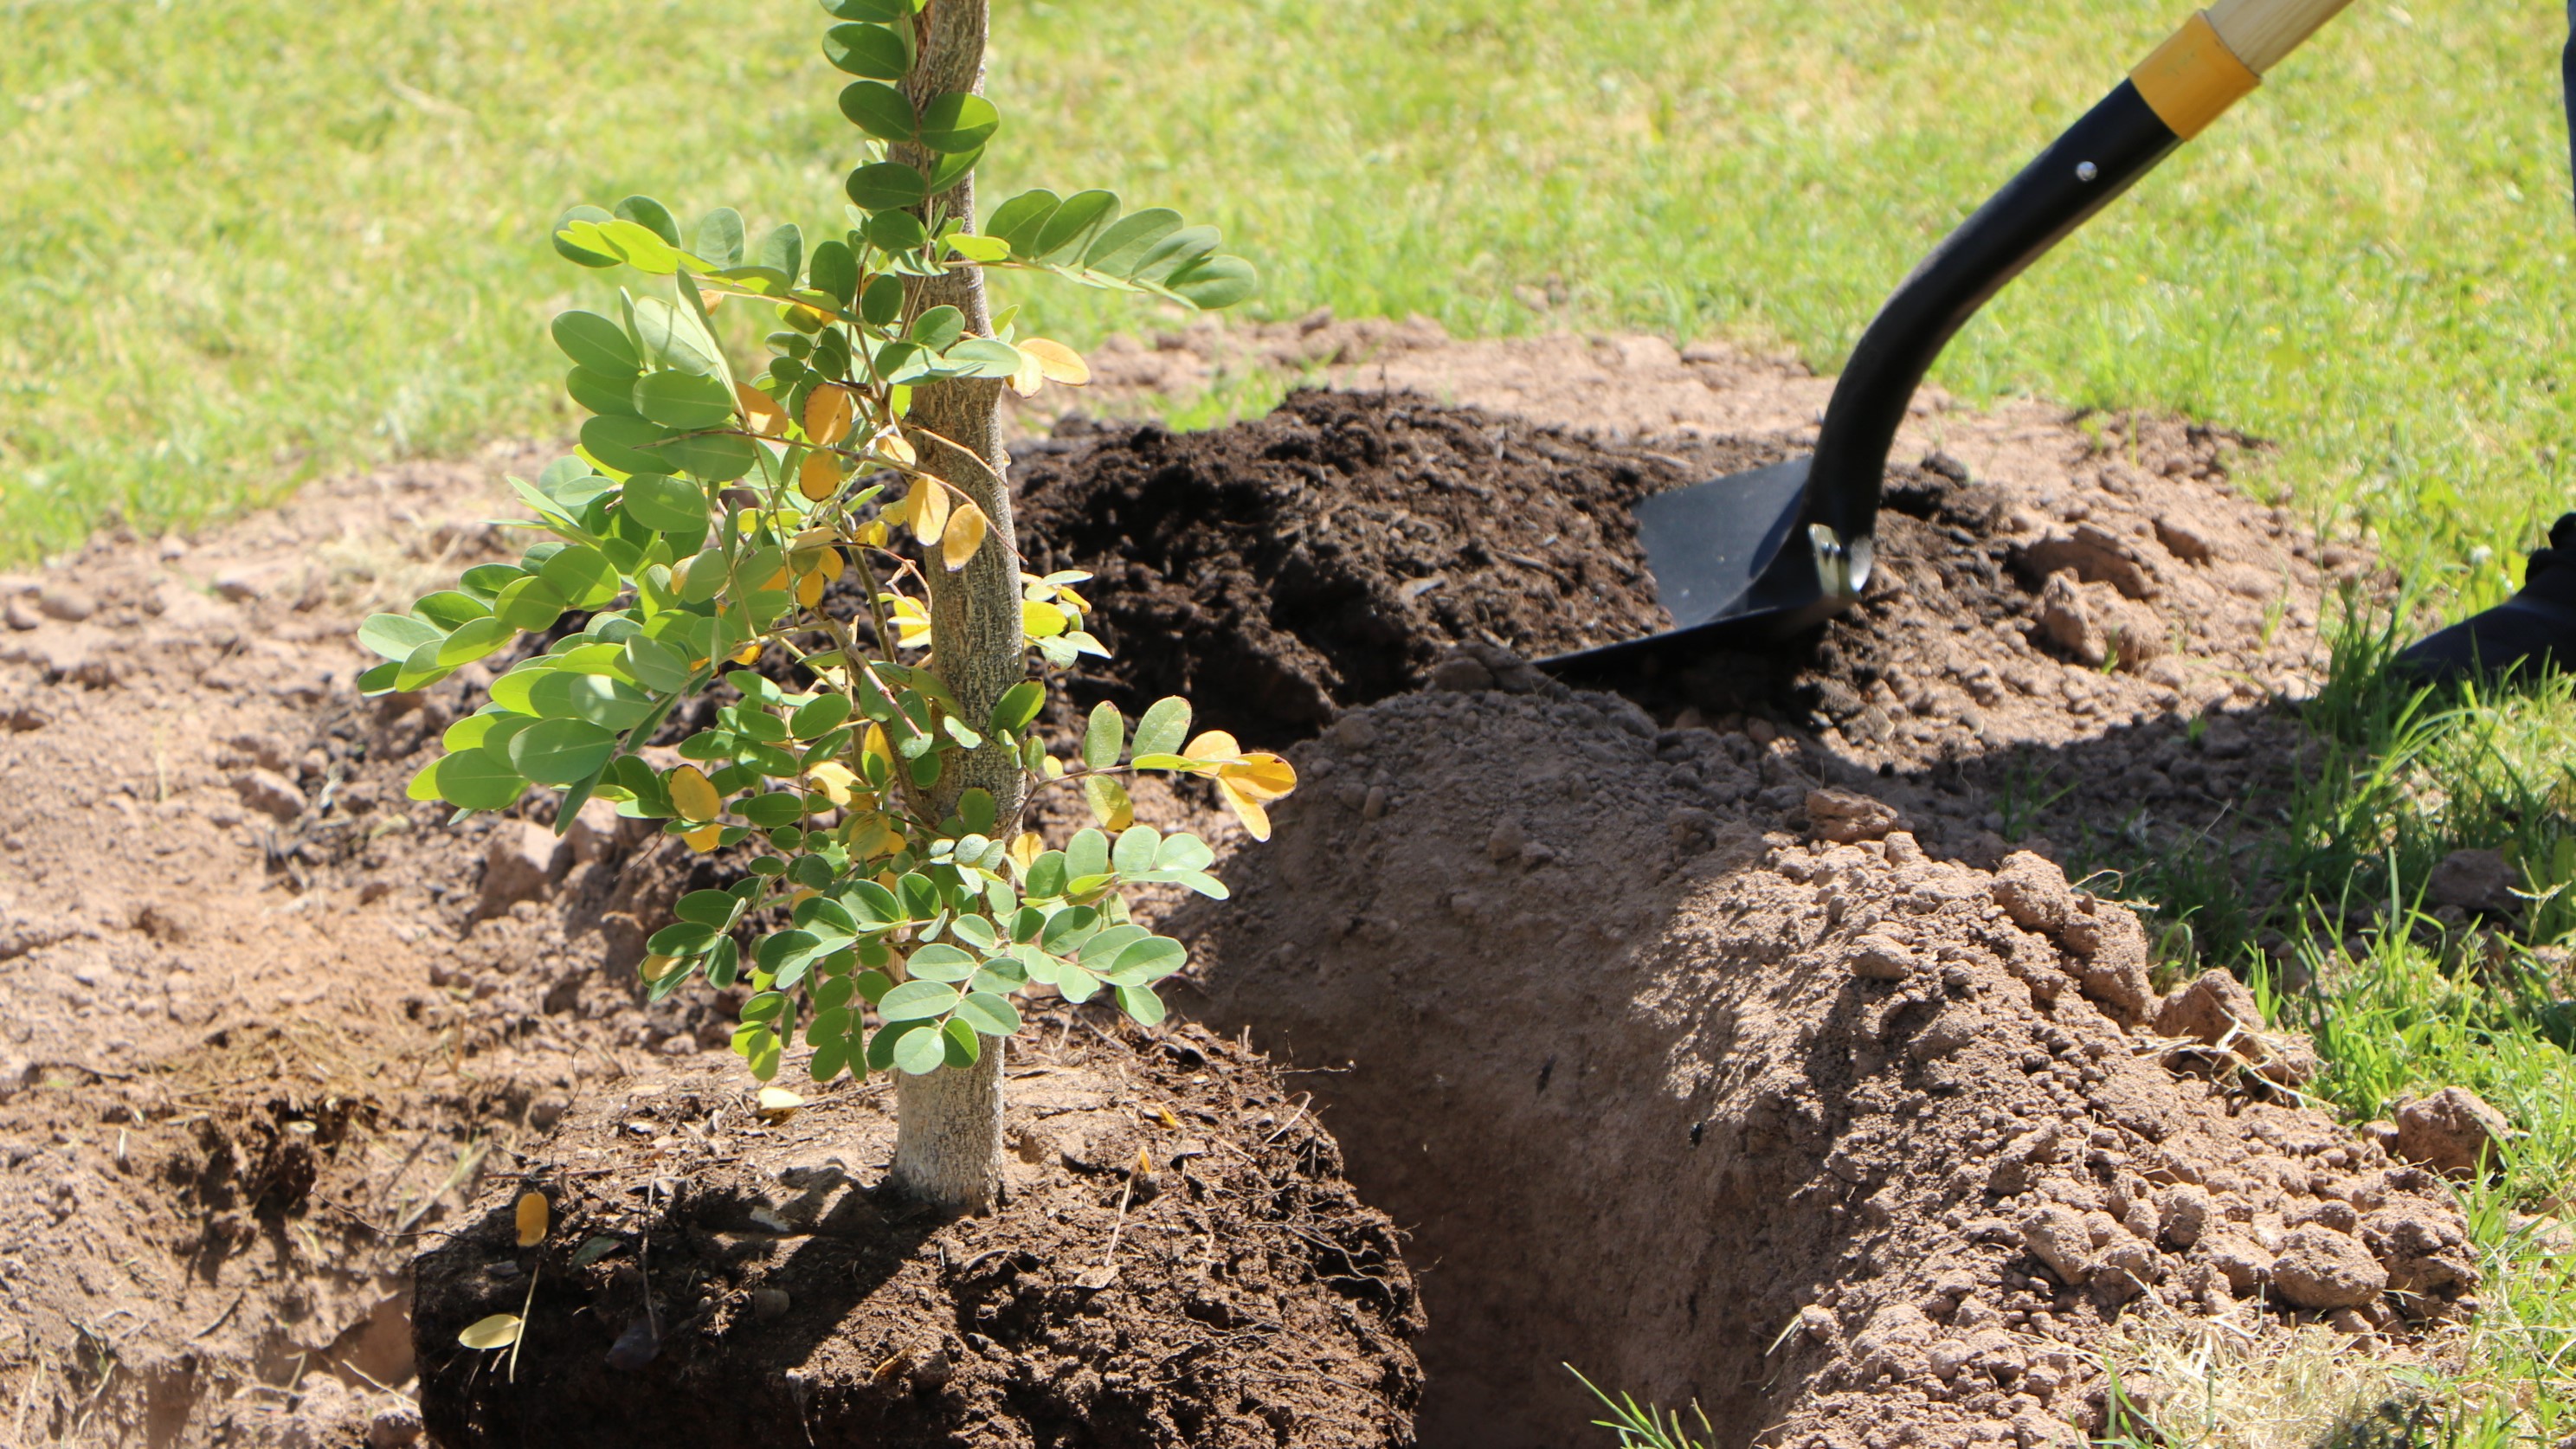 Close-up view of dirt shoveled around the base of a newly planted tree